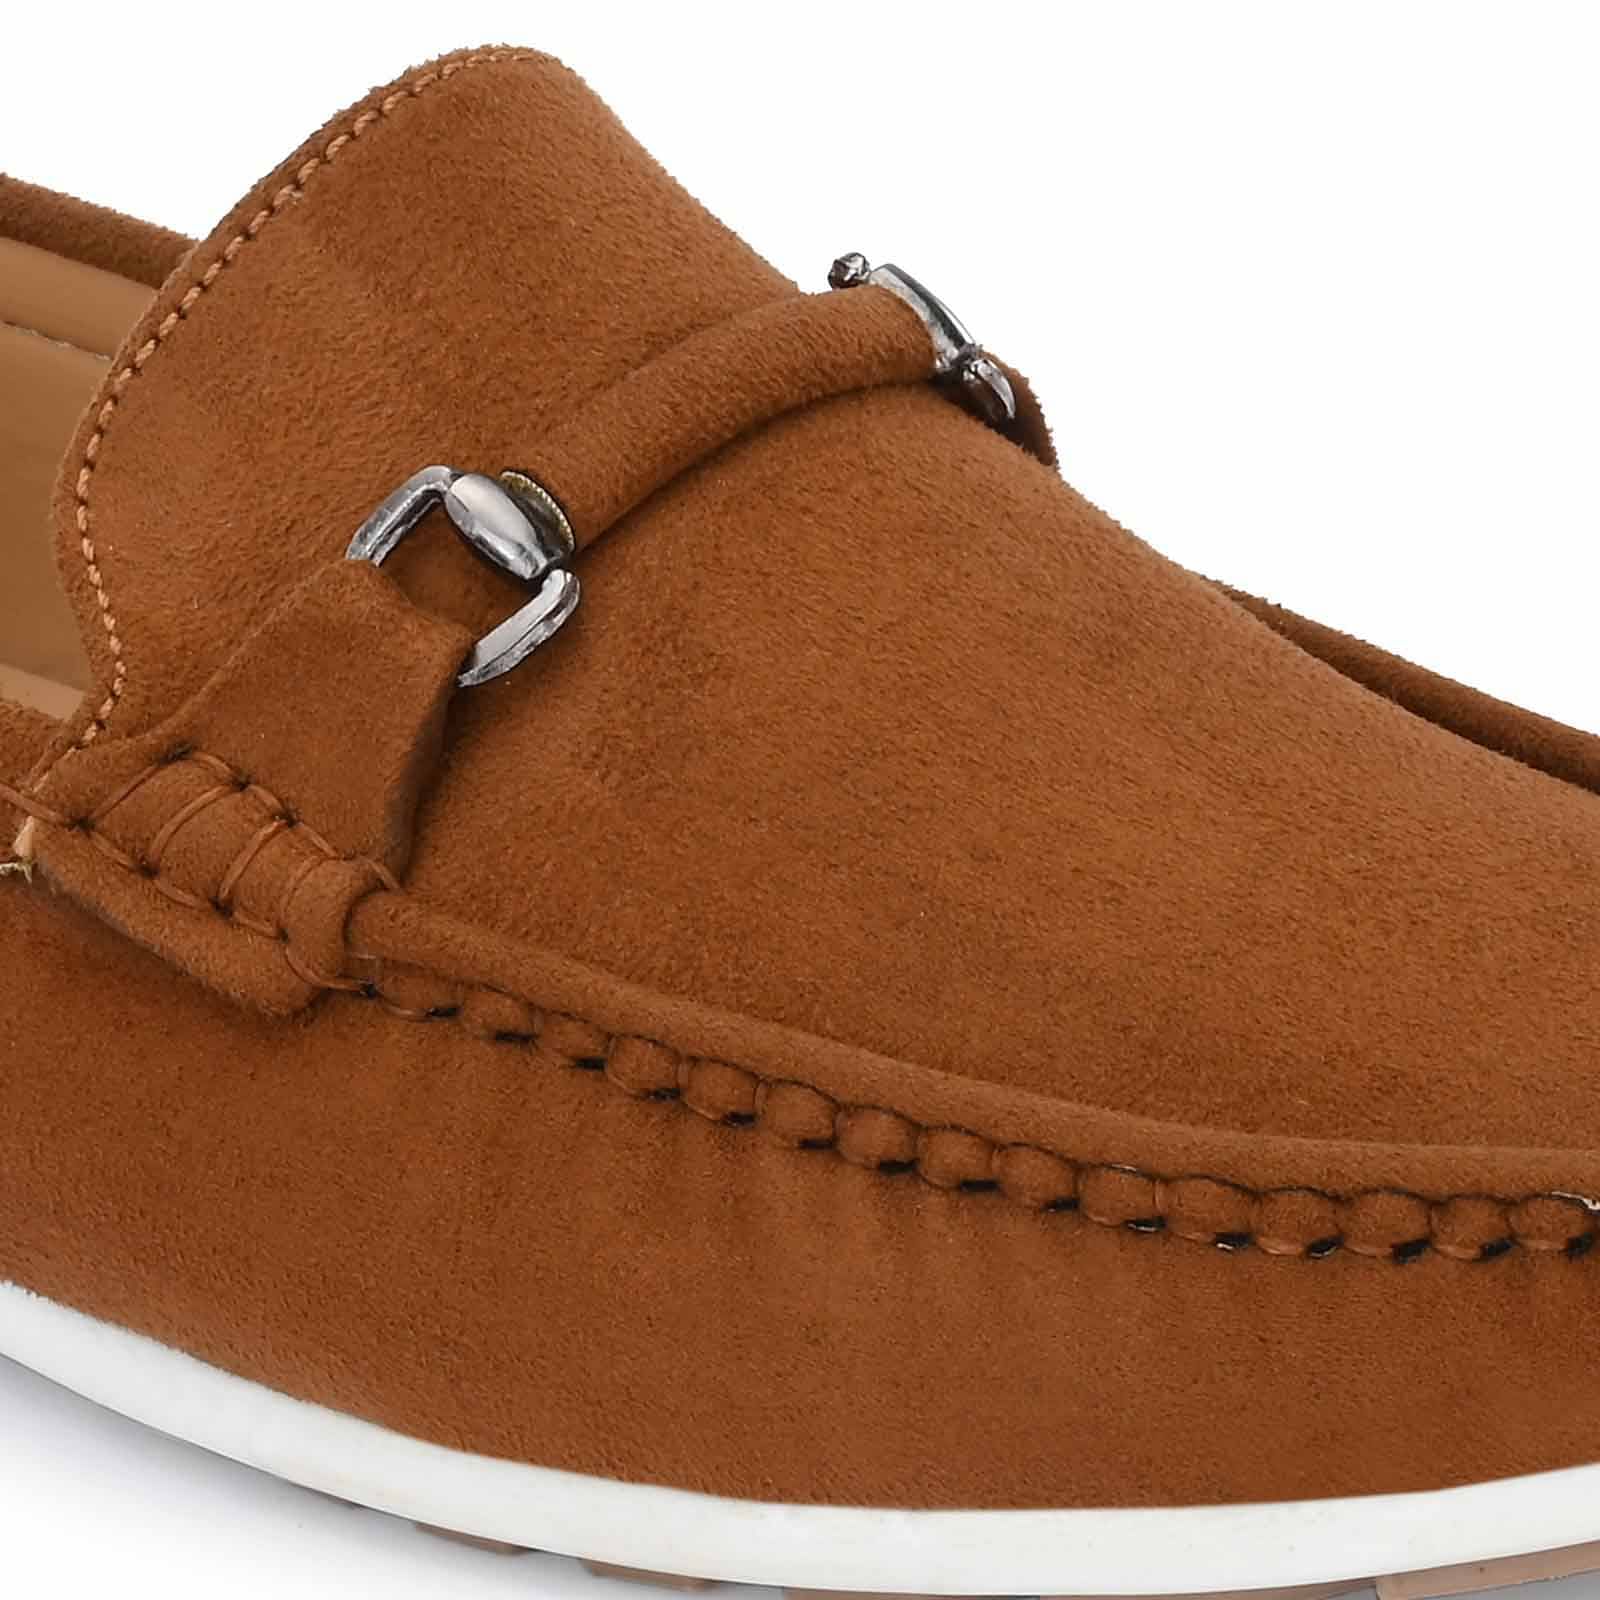 Pair-it Men's Loafers Shoes - Tan - LZ-Loafer103